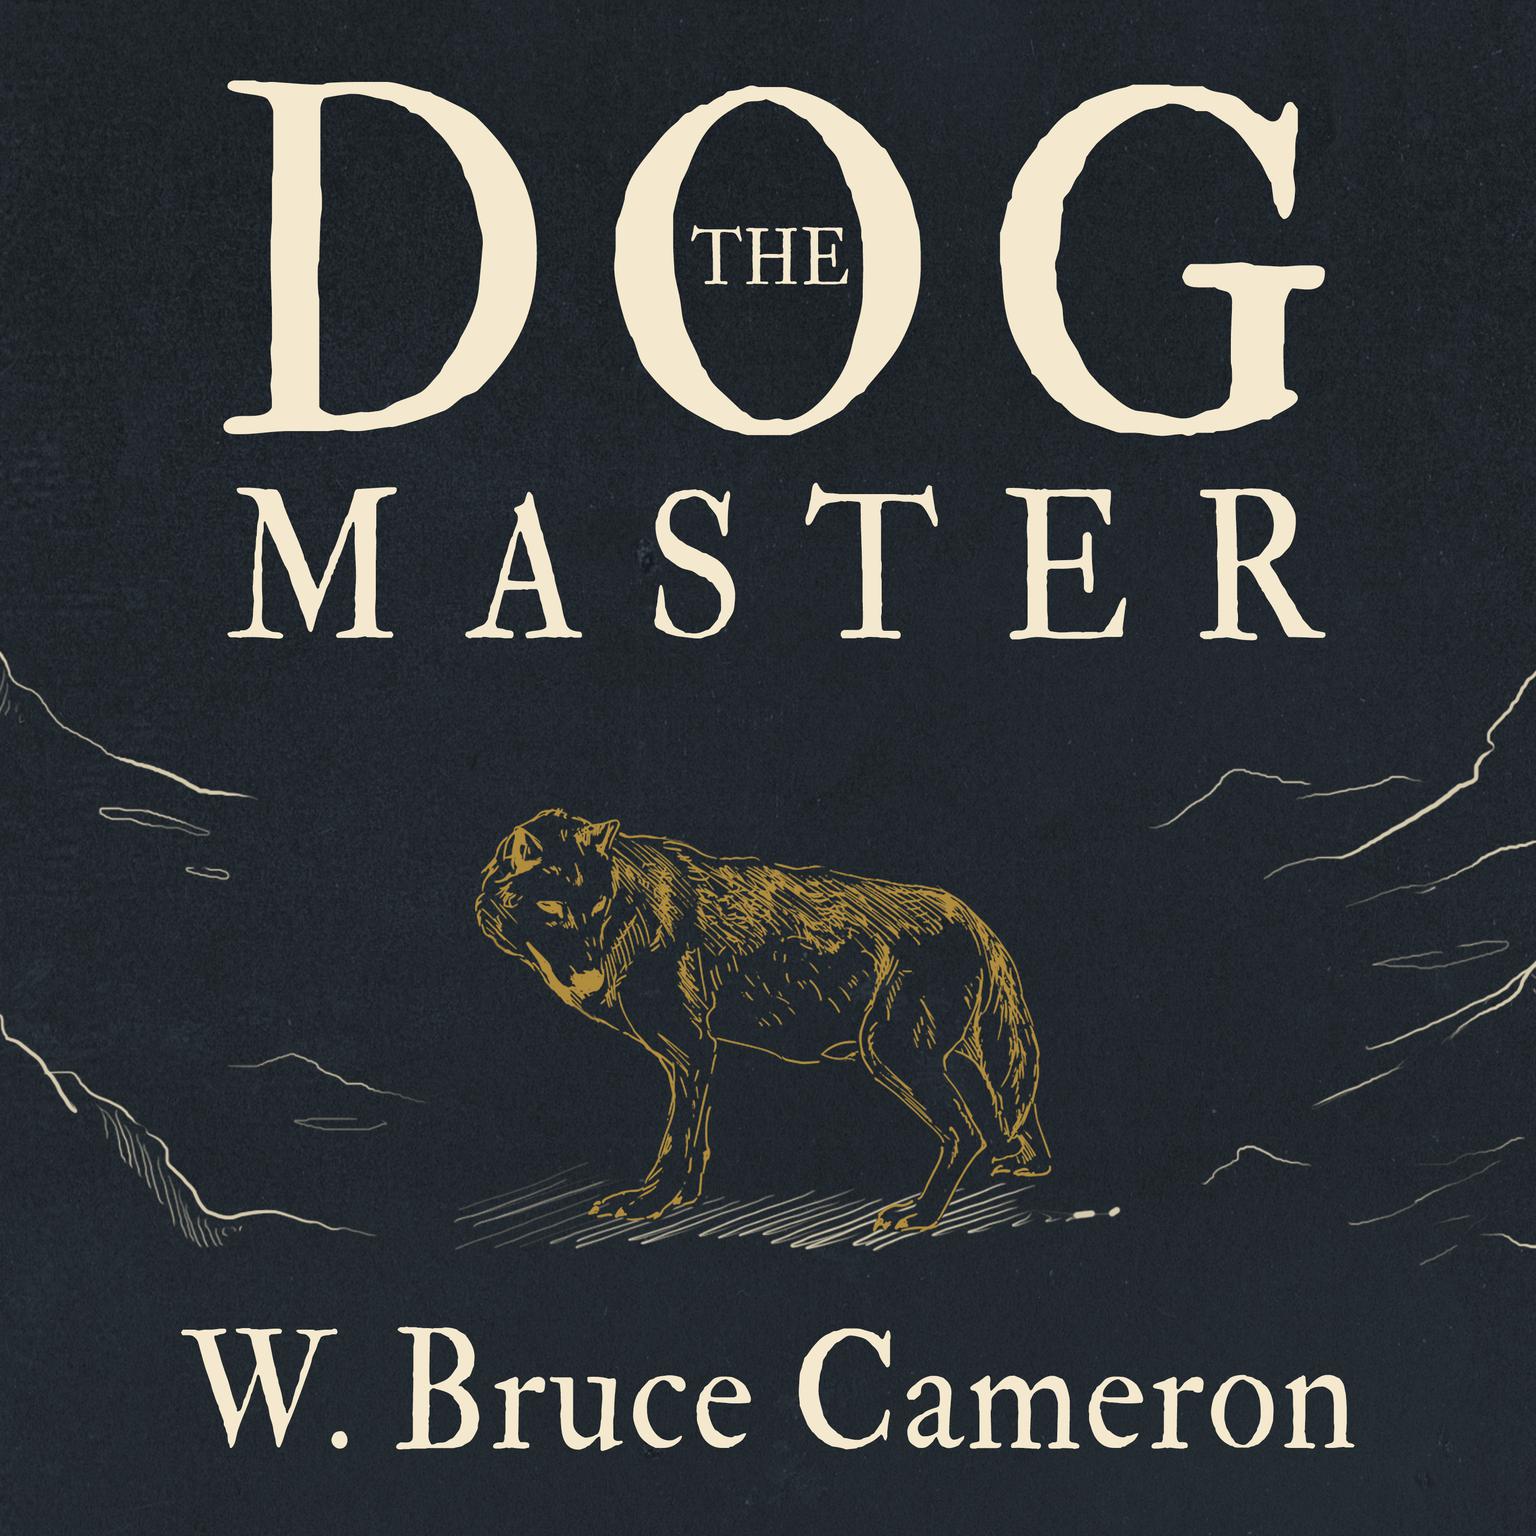 The Dog Master: A Novel of the First Dog Audiobook, by W. Bruce Cameron